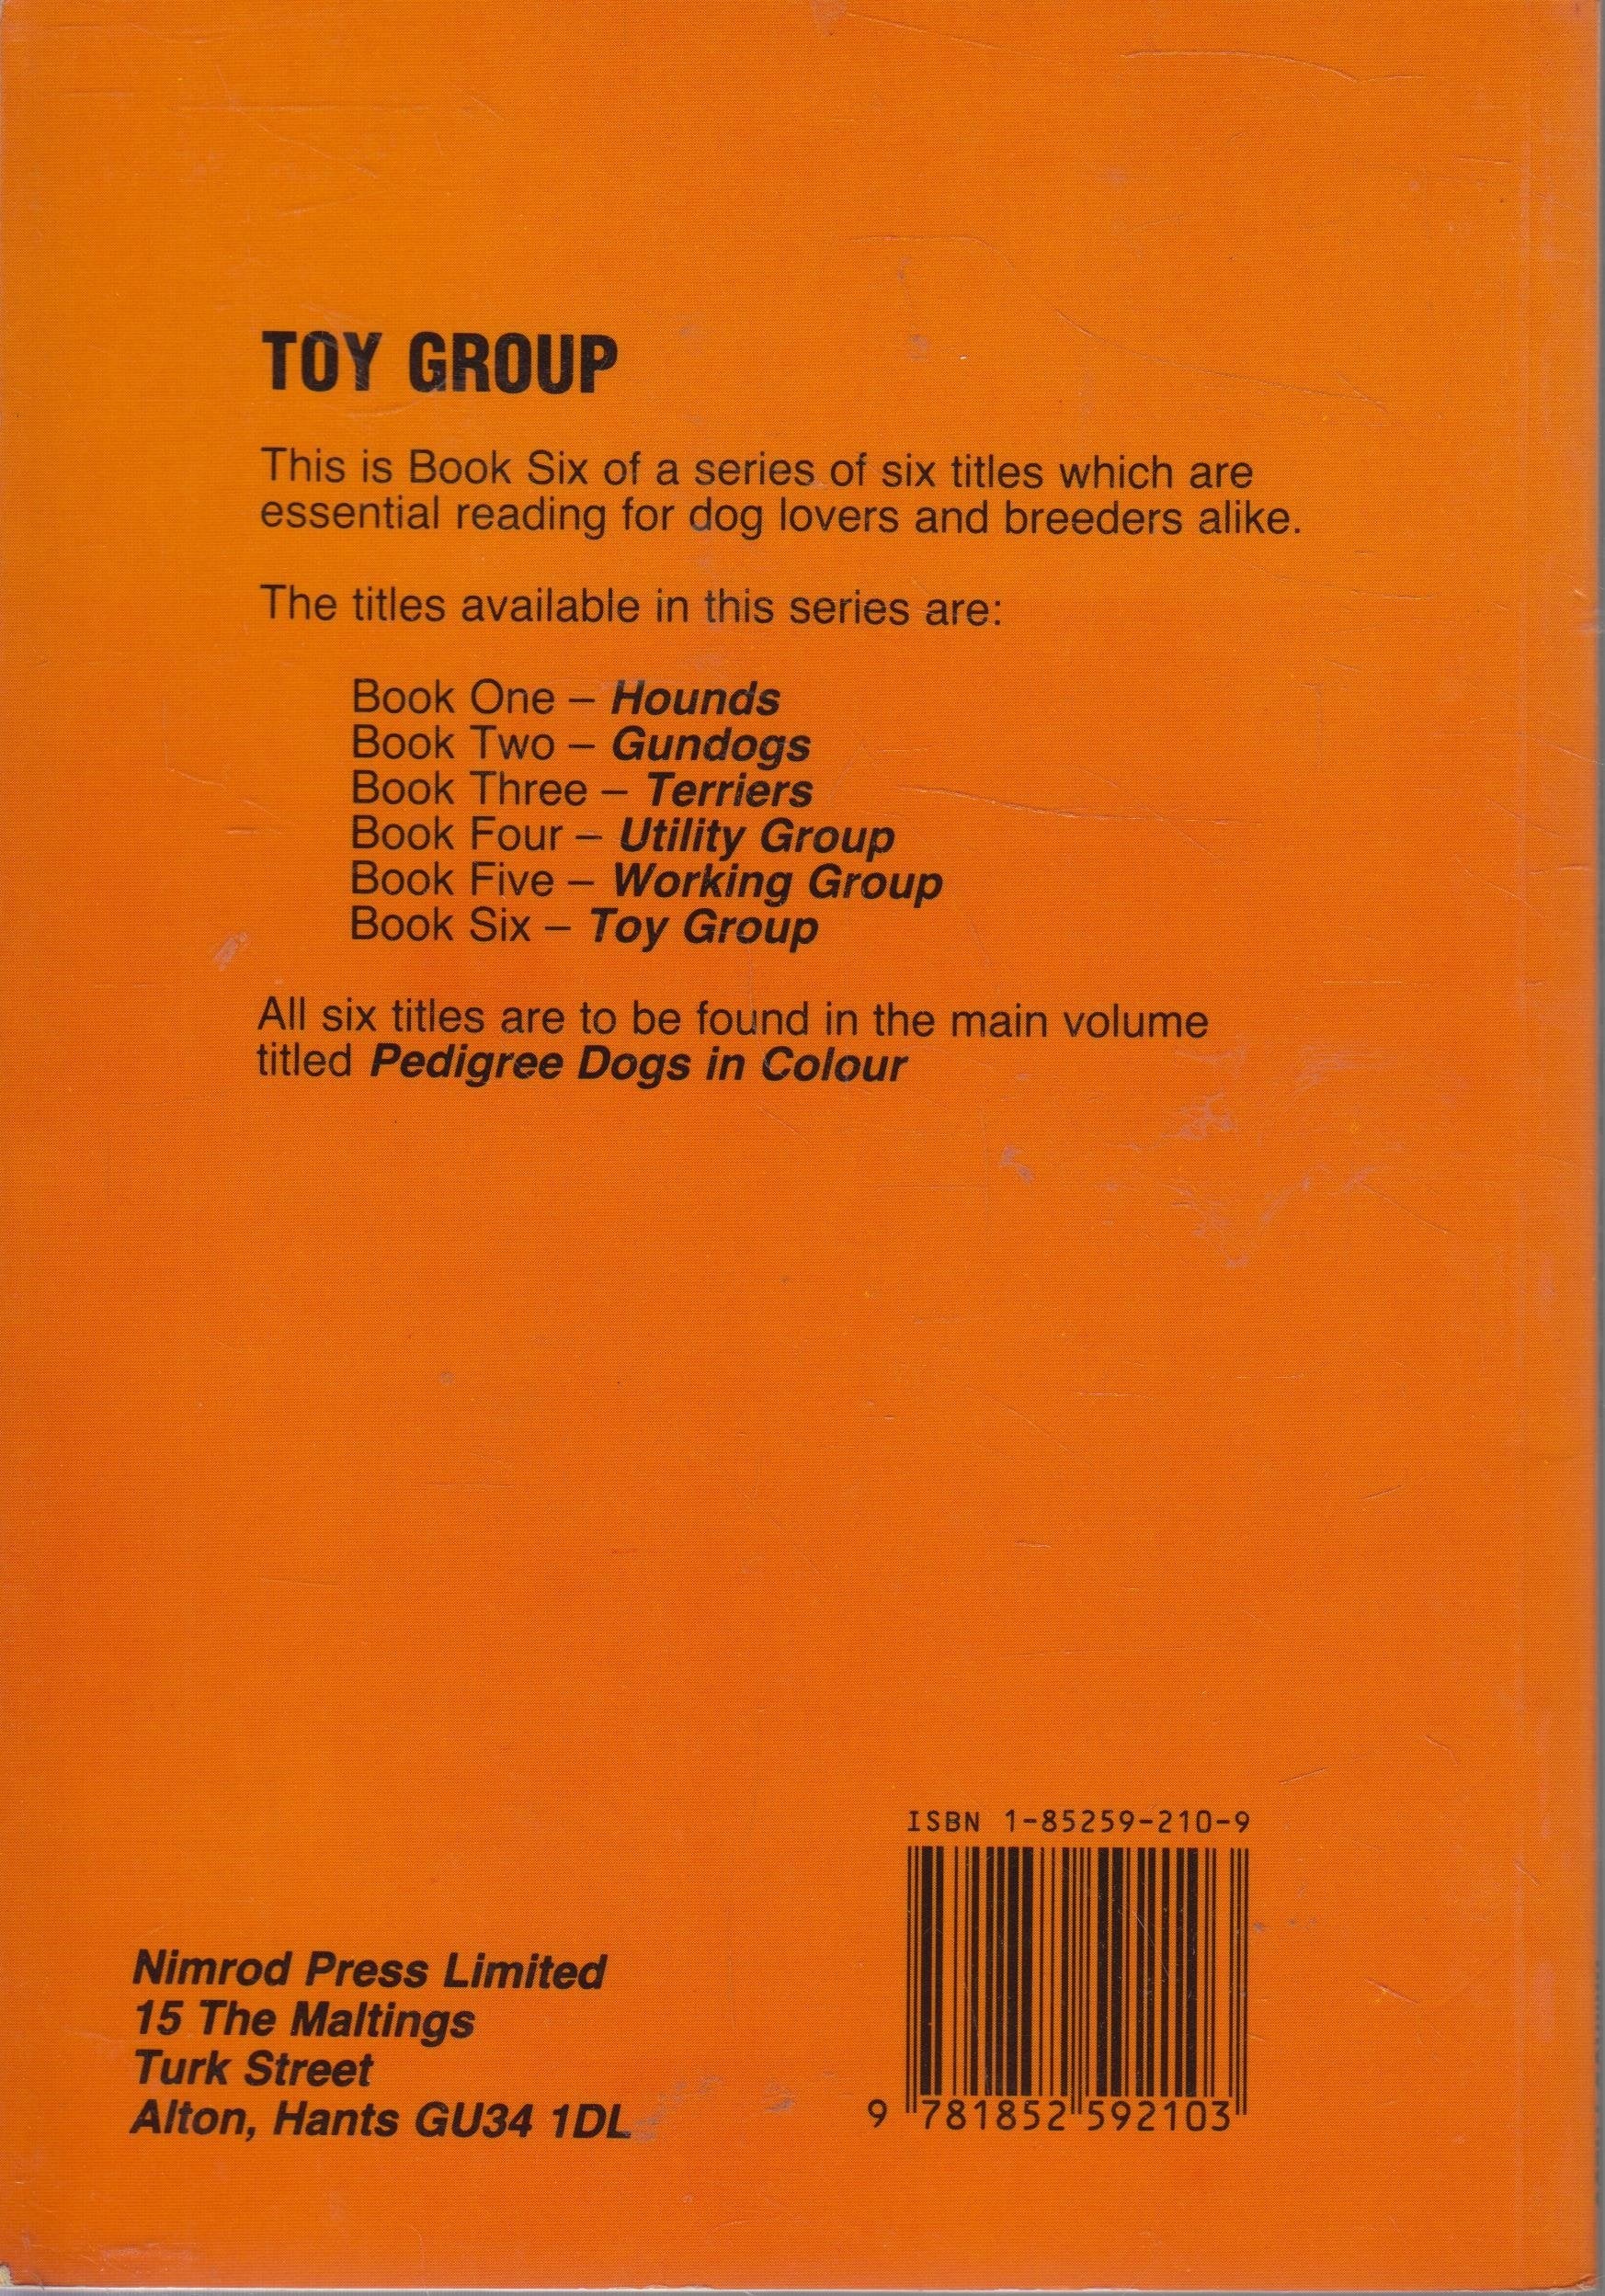 Pedigree Dogs In Colour Toy Group By Roy Hodrein Book 6